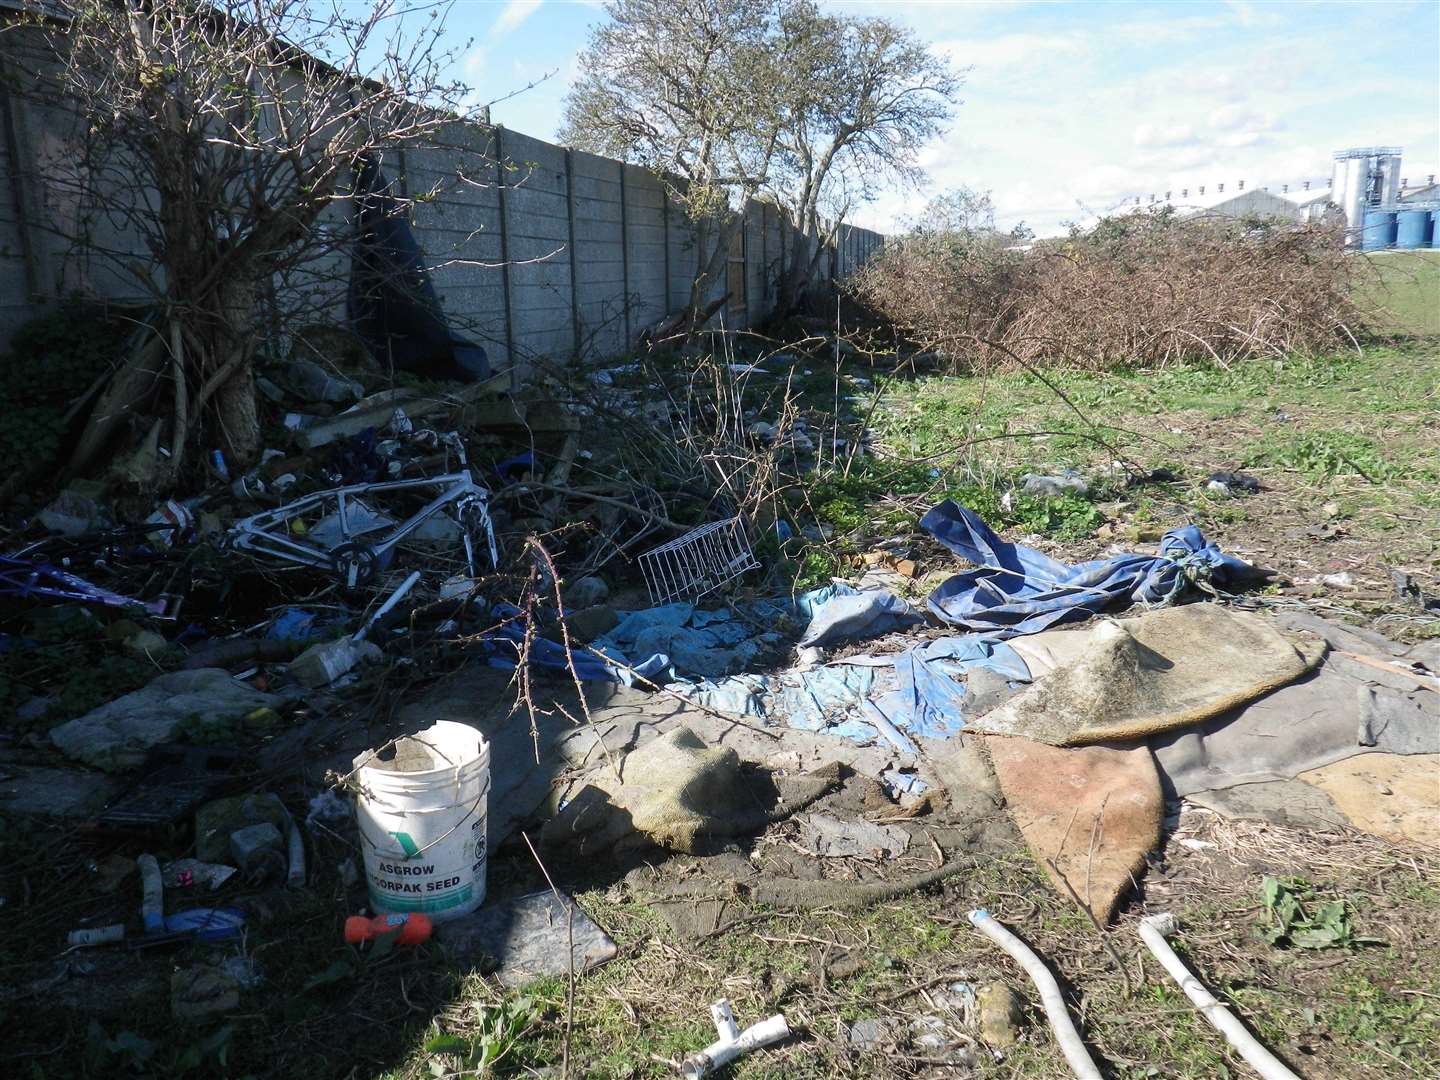 Barbed wire, plastic netting and litter were found dumped next to the horses. (3177510)